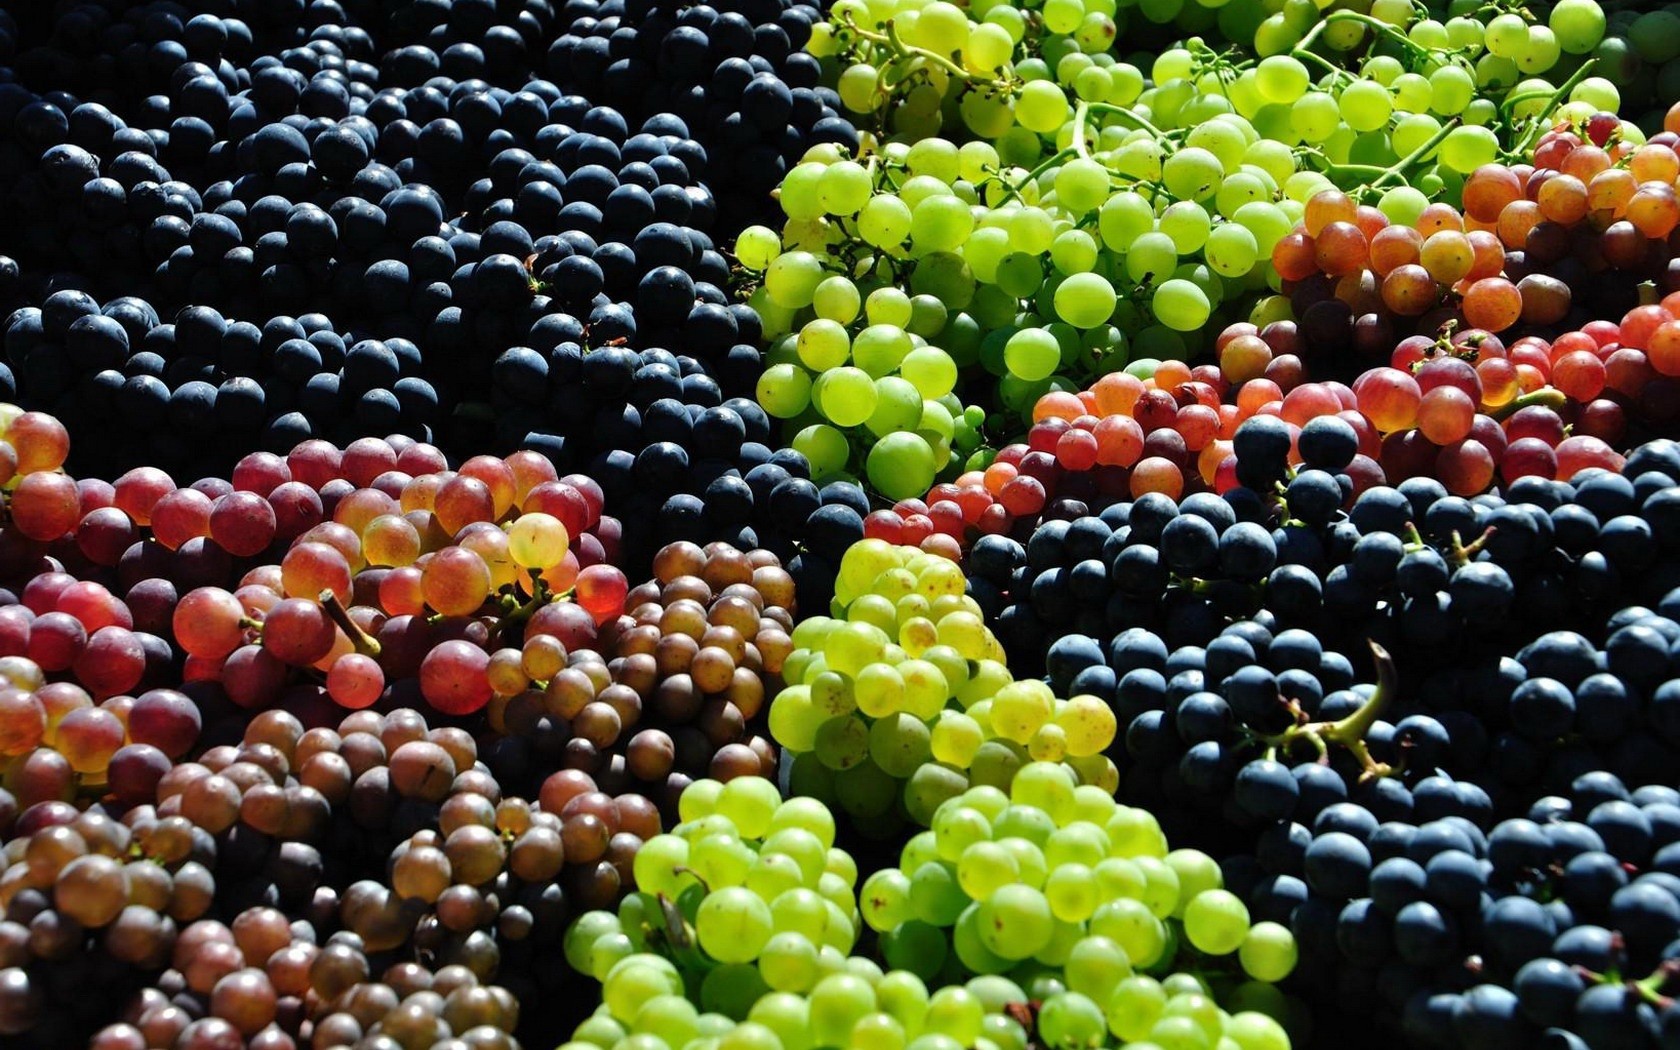 grapes images to color wallpaper